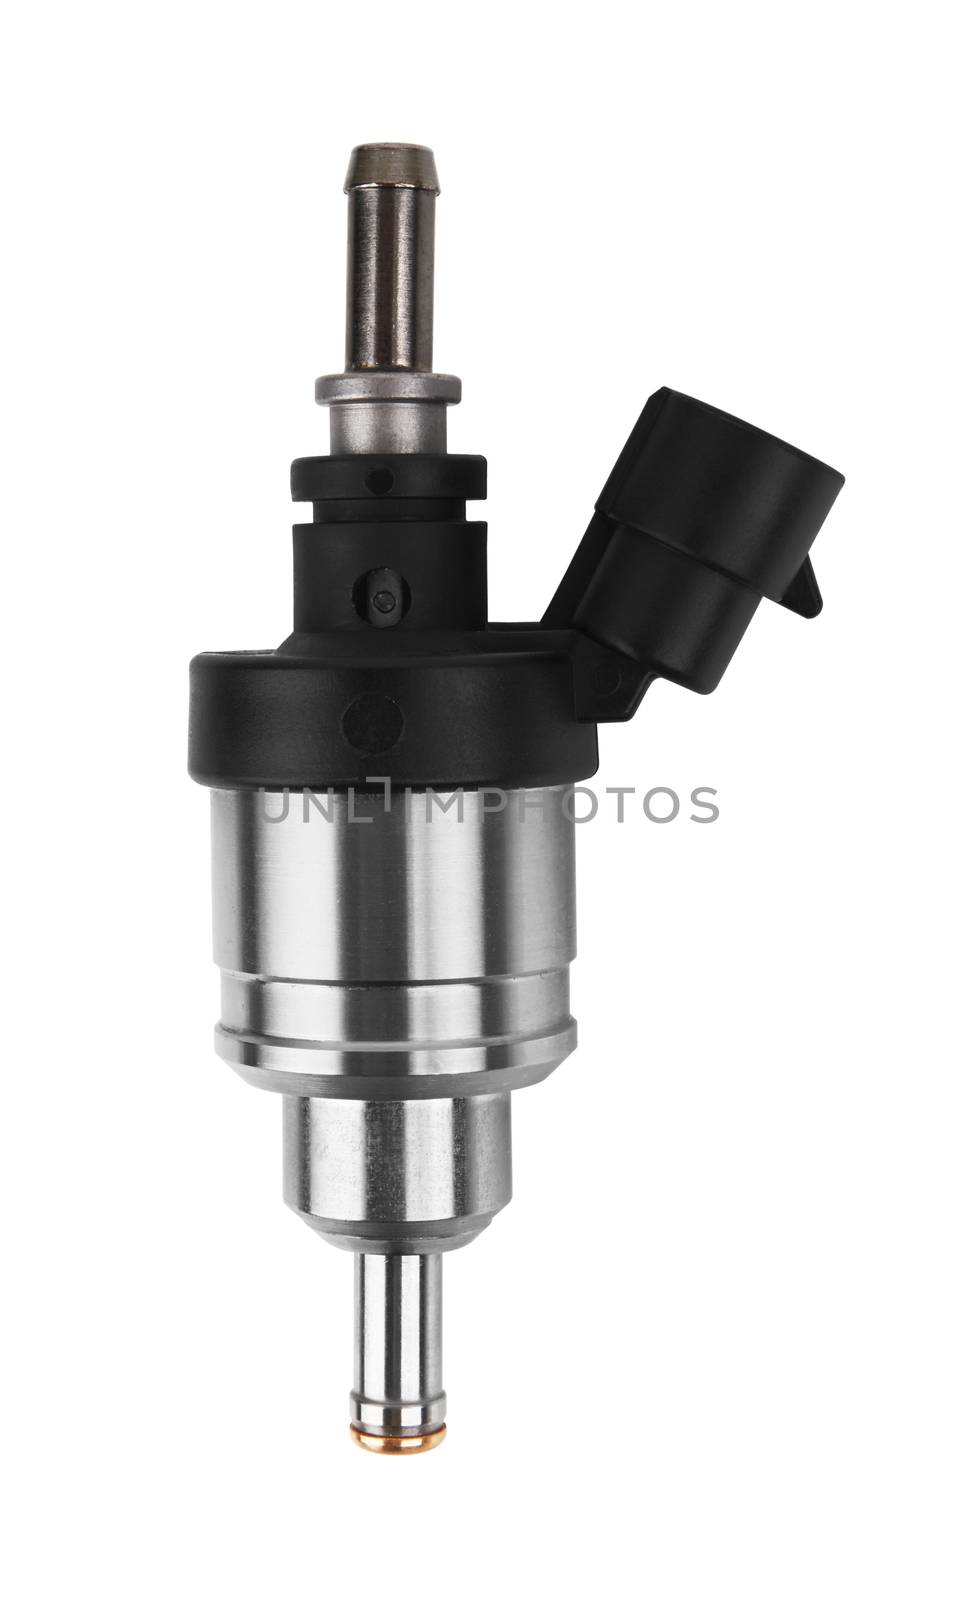 Gas injector isolated on a white background